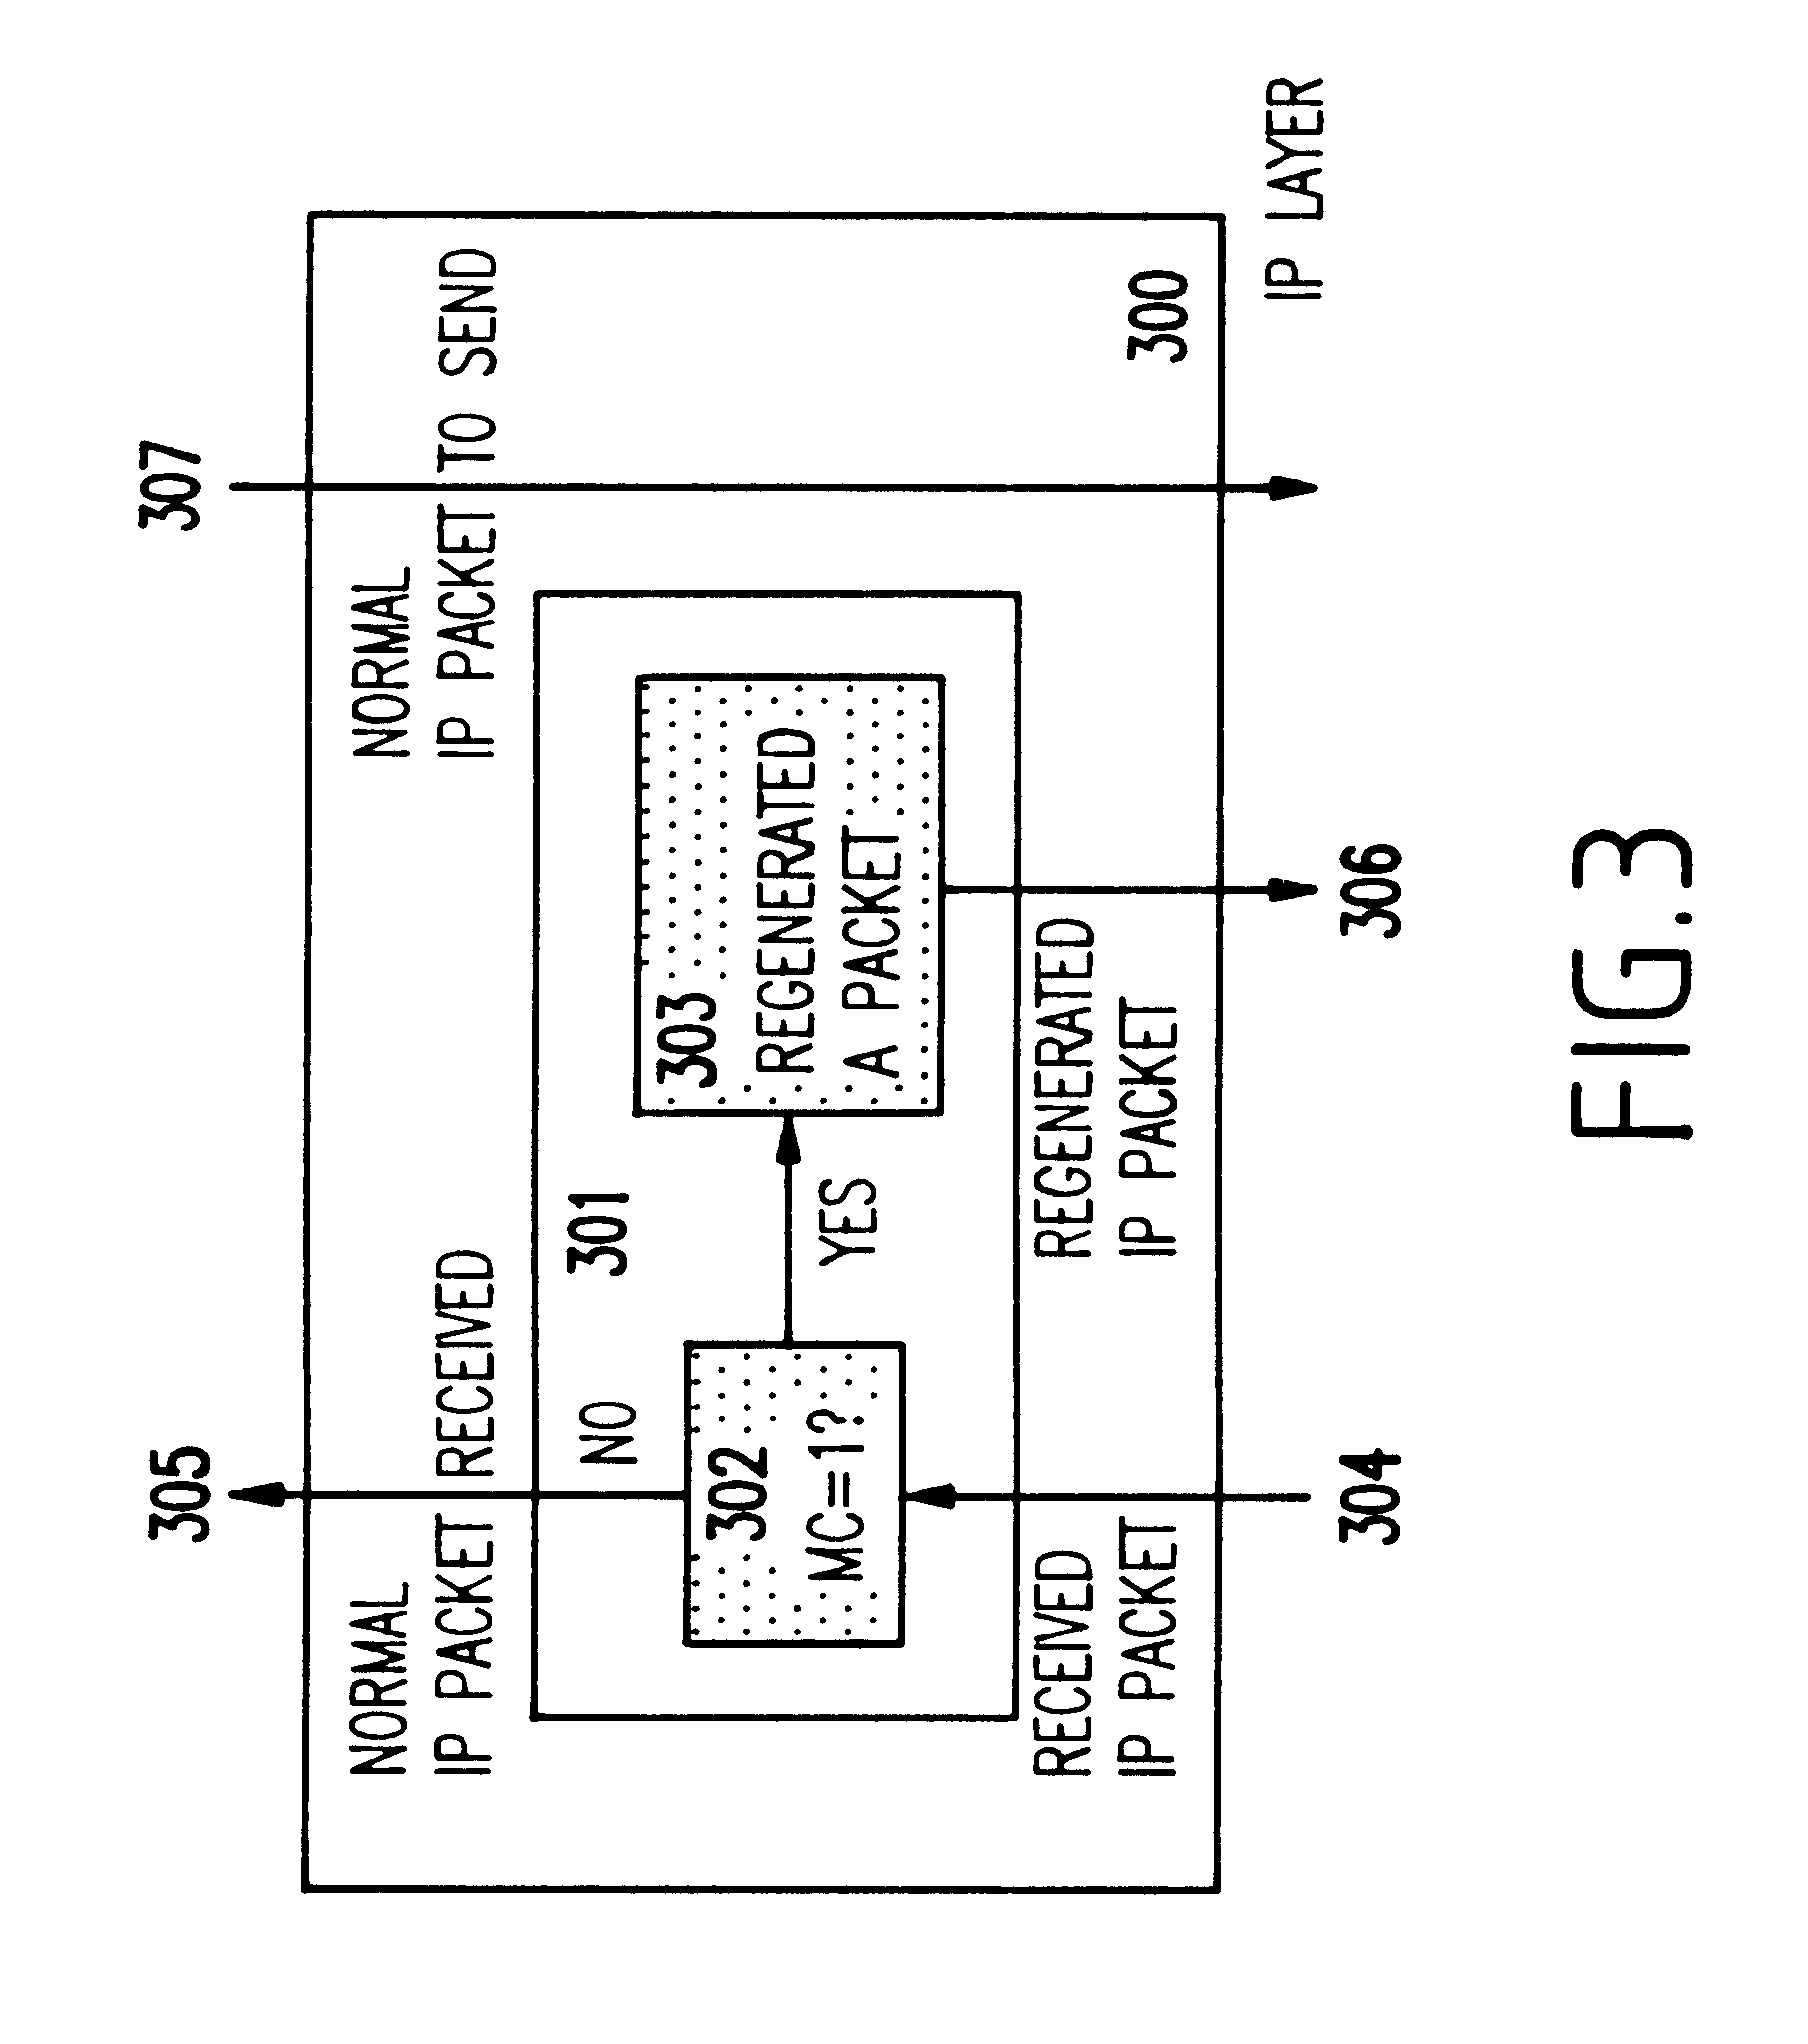 System and method for amicable small group multicast in a packet-switched network